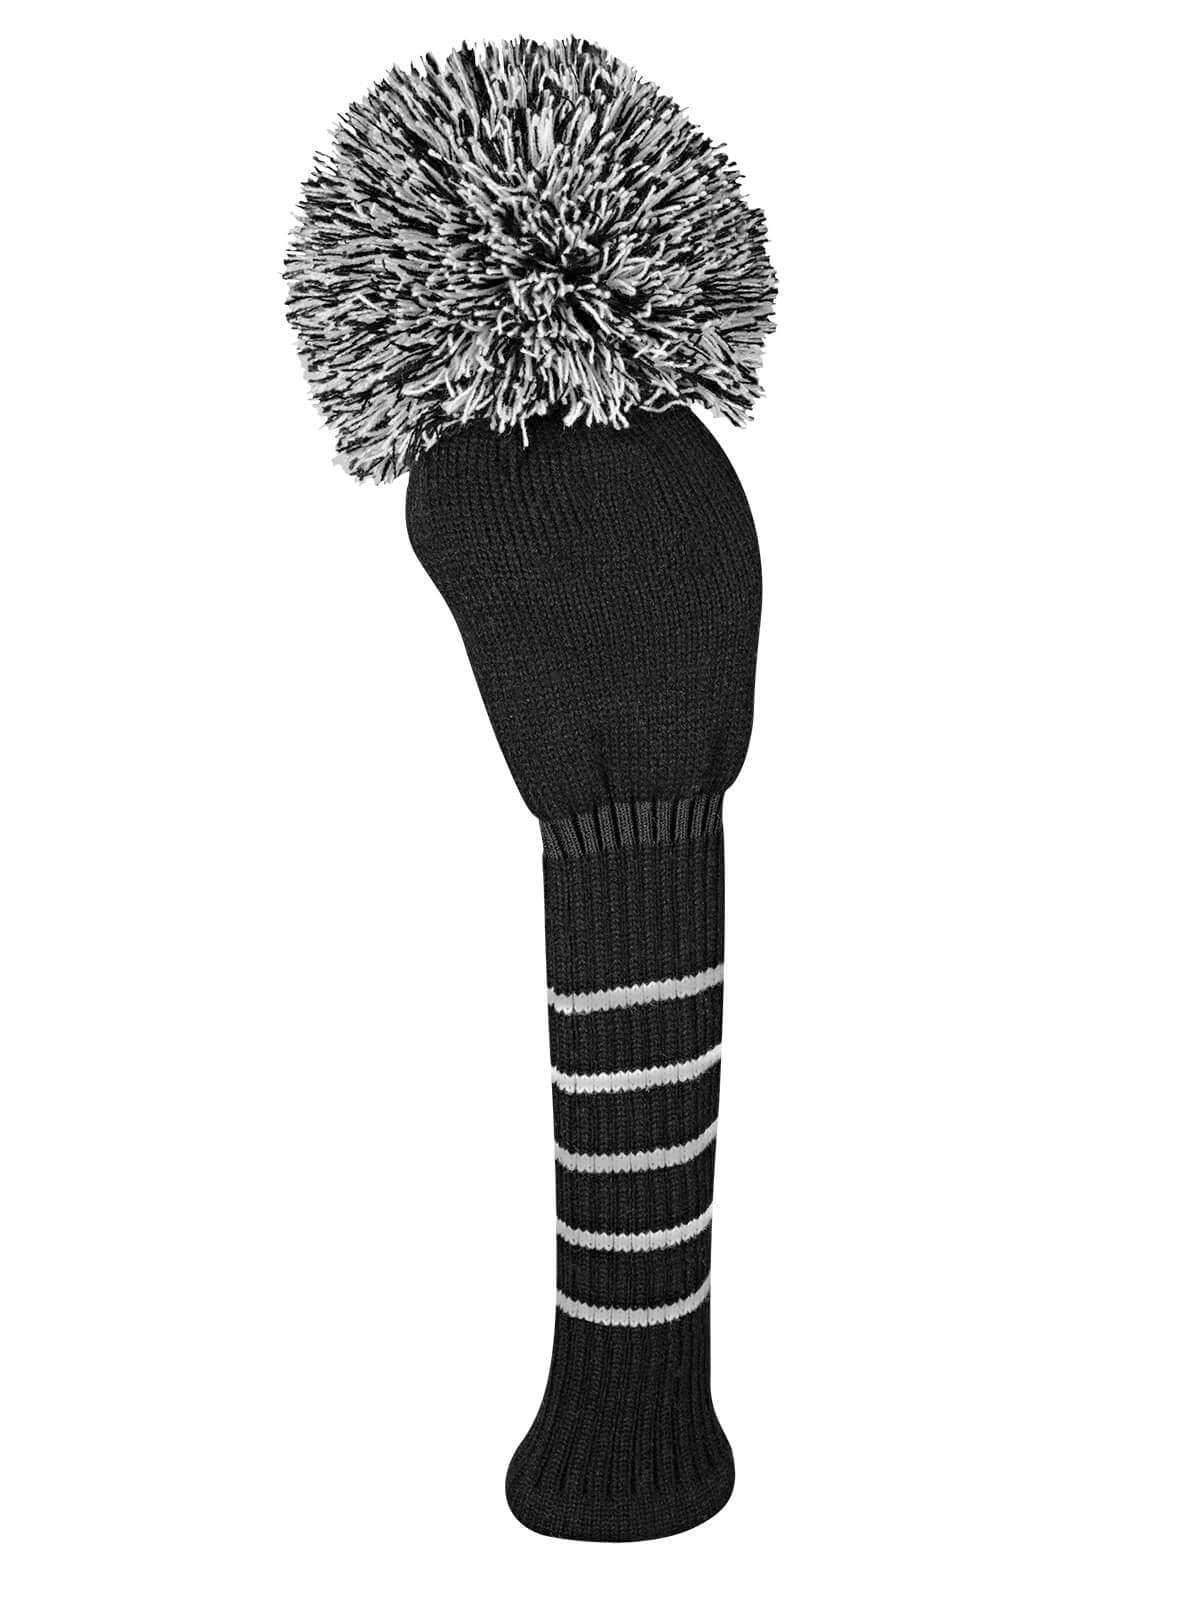 Solid Black Driver Headcover